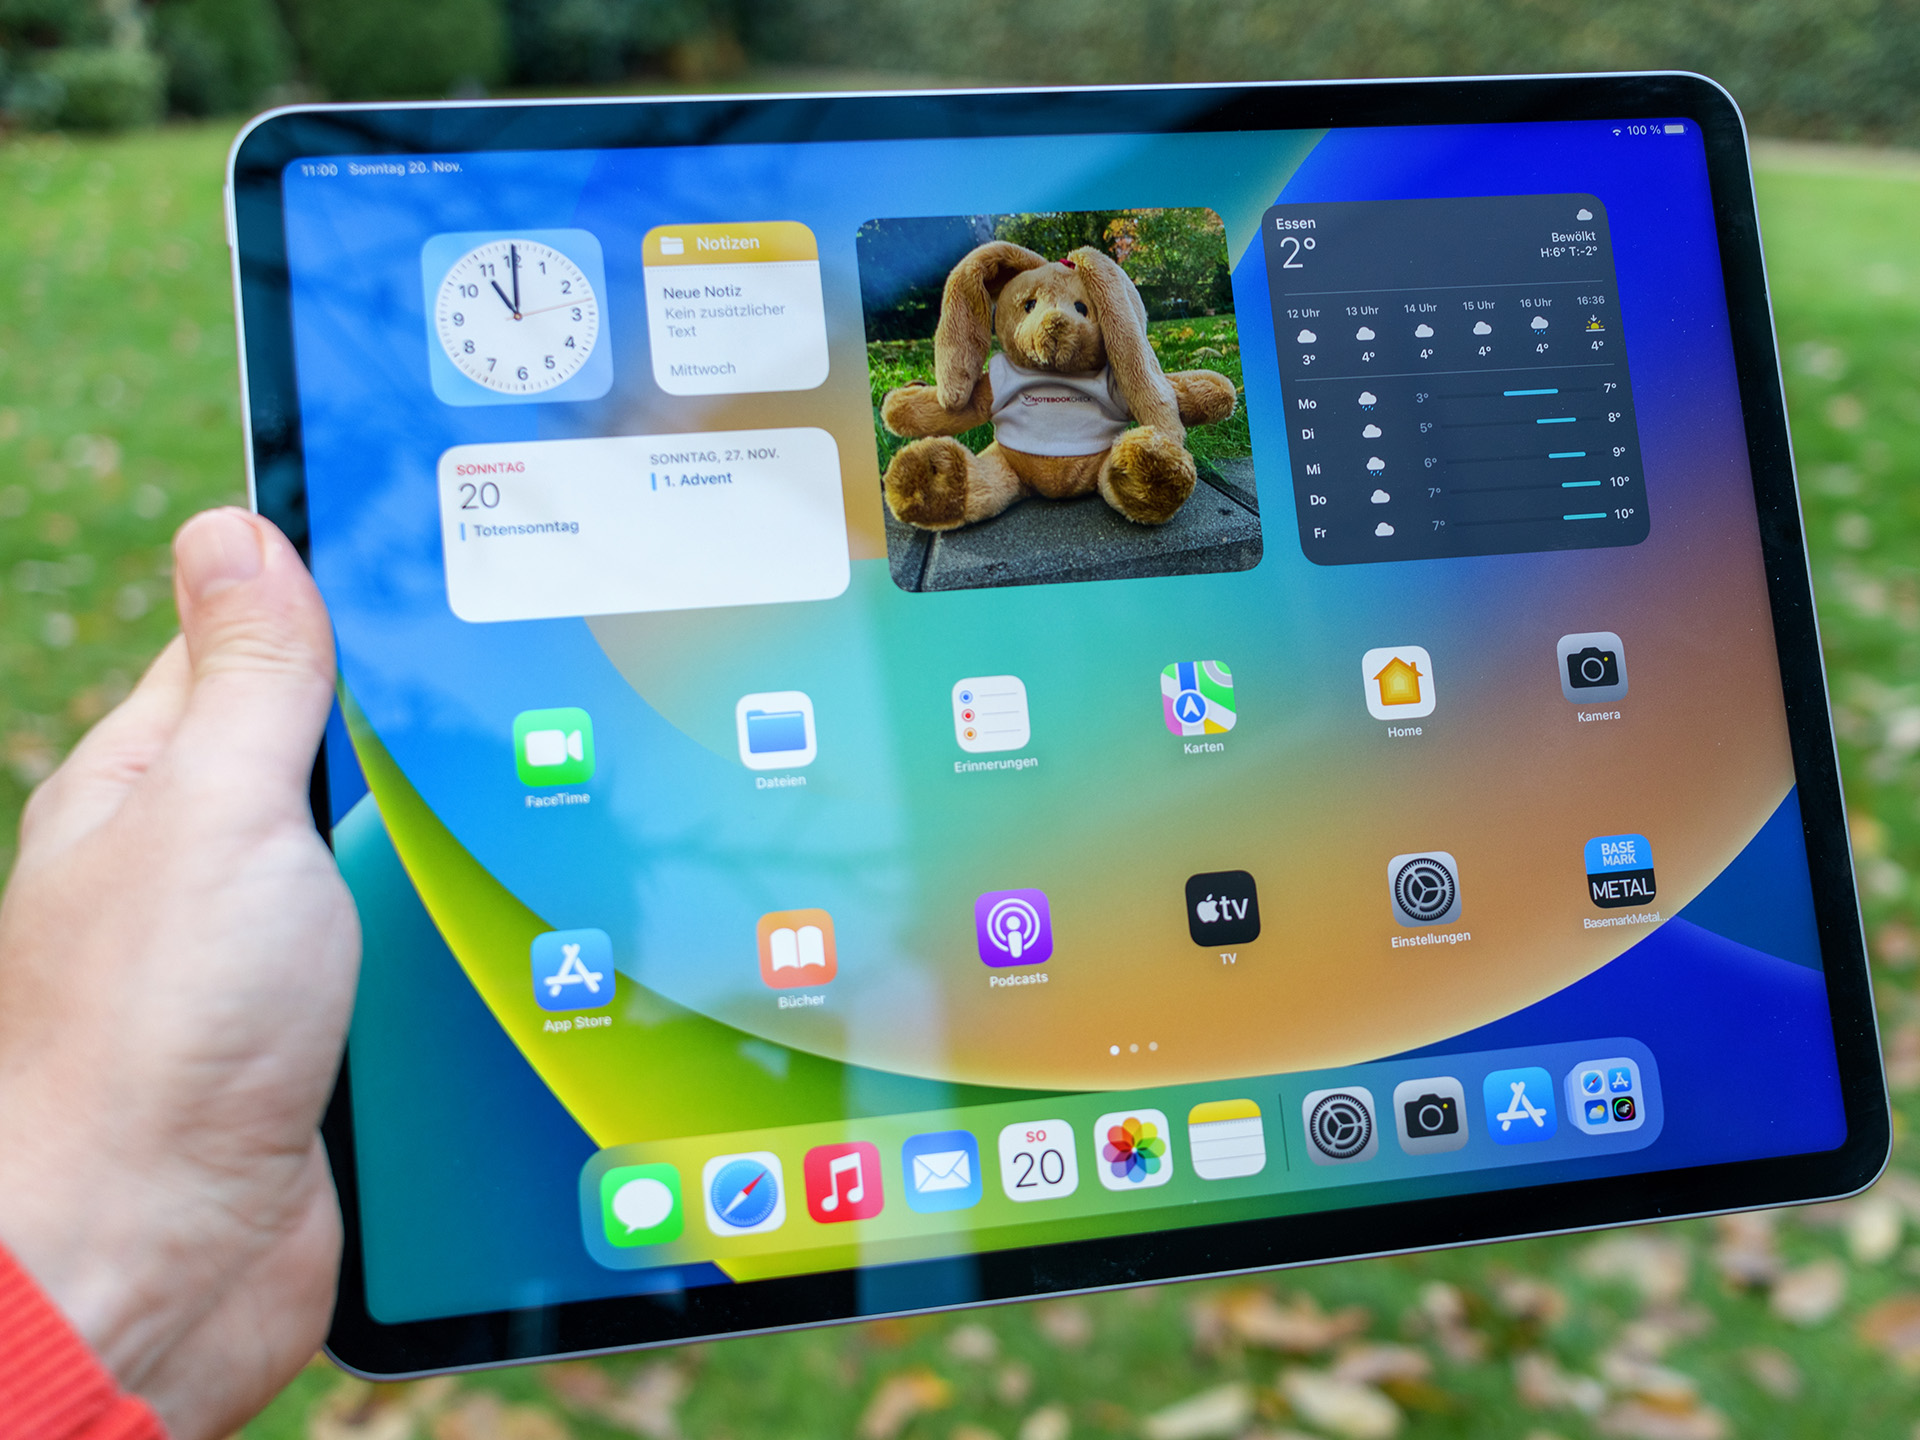 Apple's Bigger iPad Air: Rumours about a 12.9-inch display surface